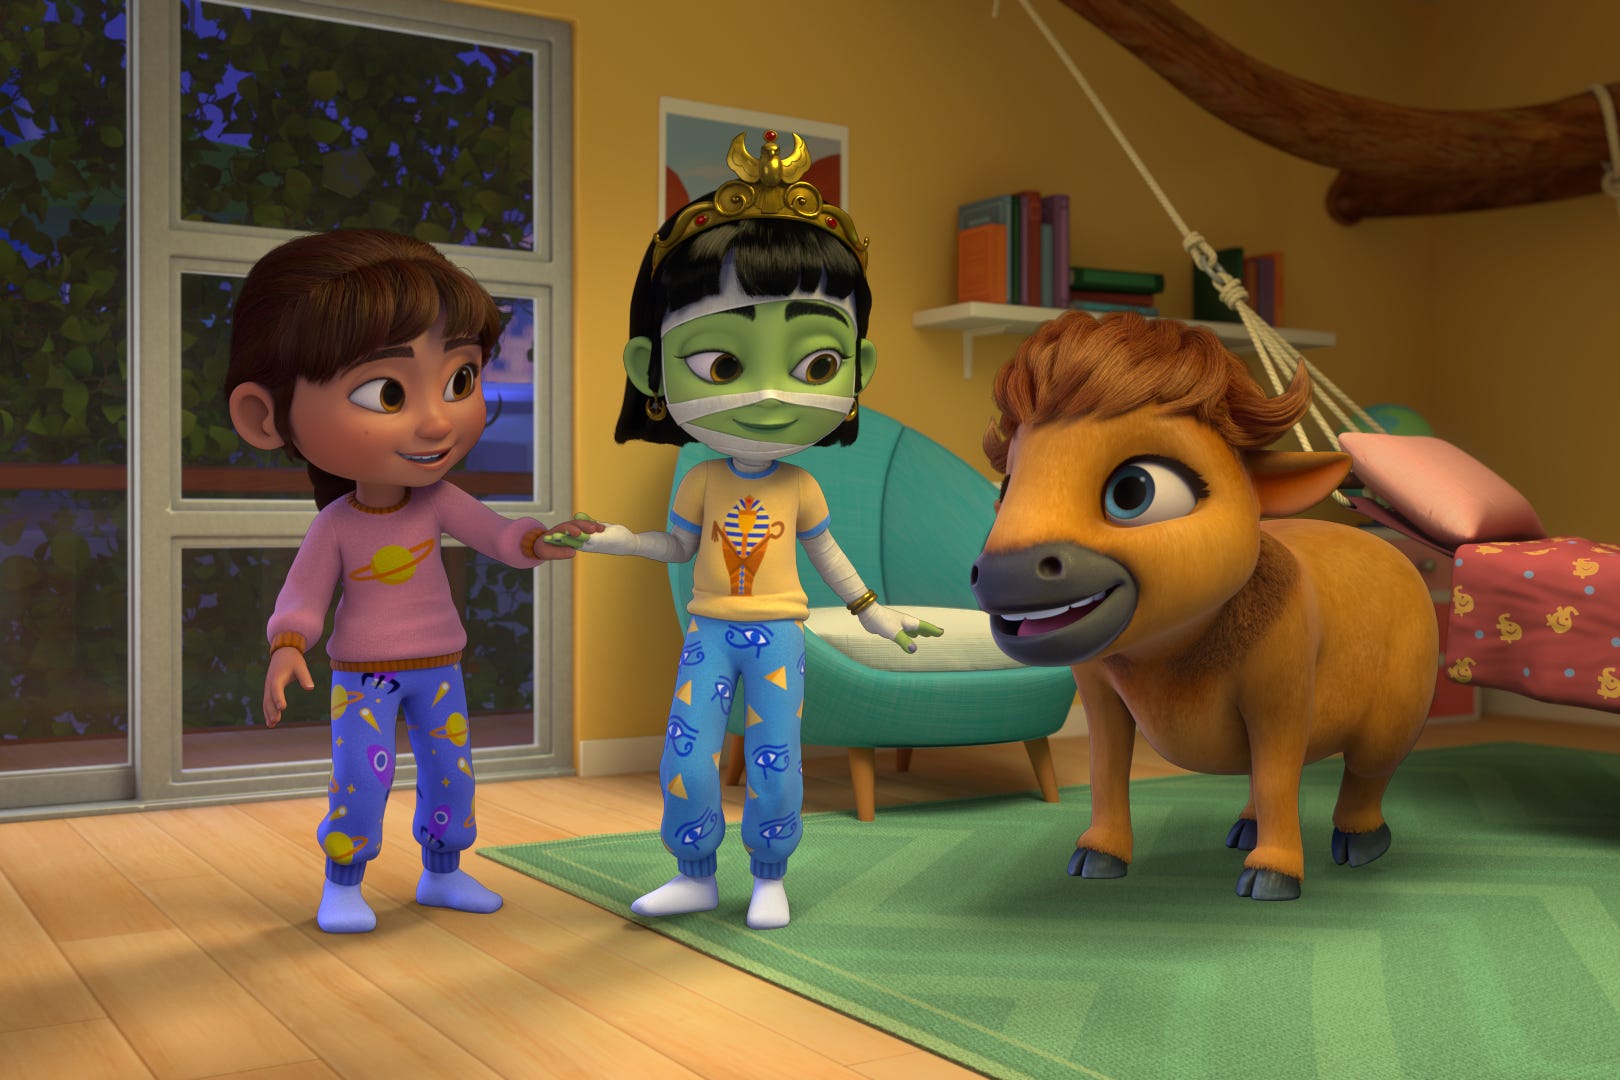 Protagonist 6-year old Ridley (left) is an action-adventure hero who lives in a treehouse inside a museum, where animals and artifacts come alive.